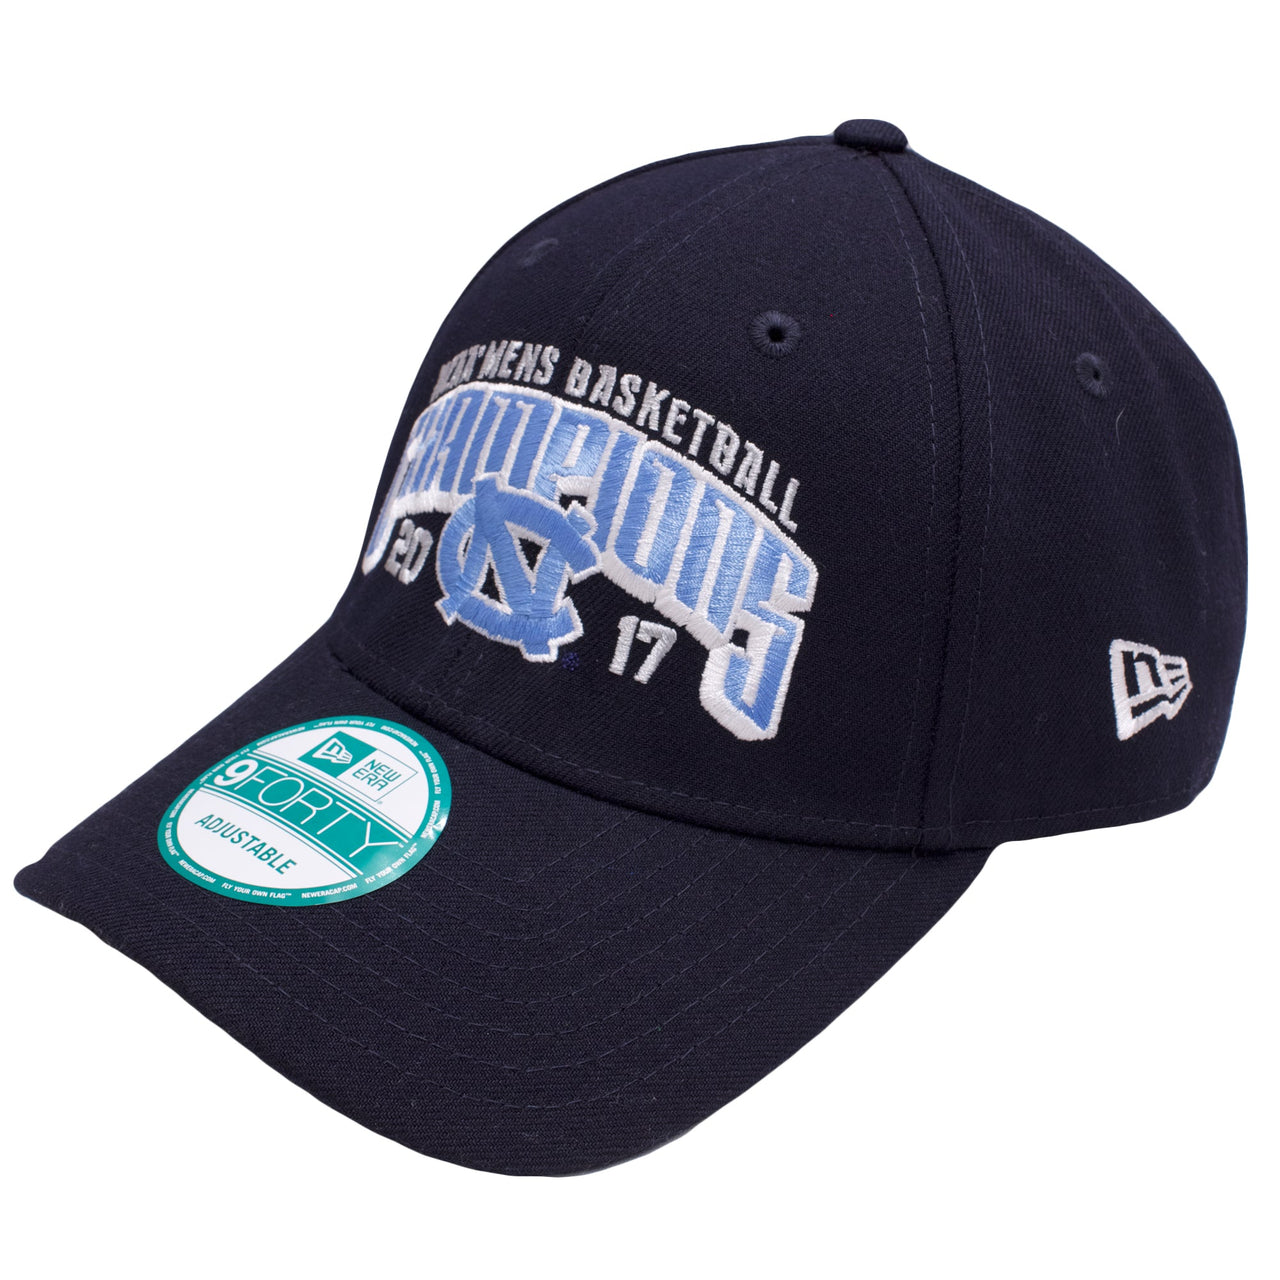 the NCAA Men's Basketball 2017 Championship dad hat has a structured crown and a bent brim